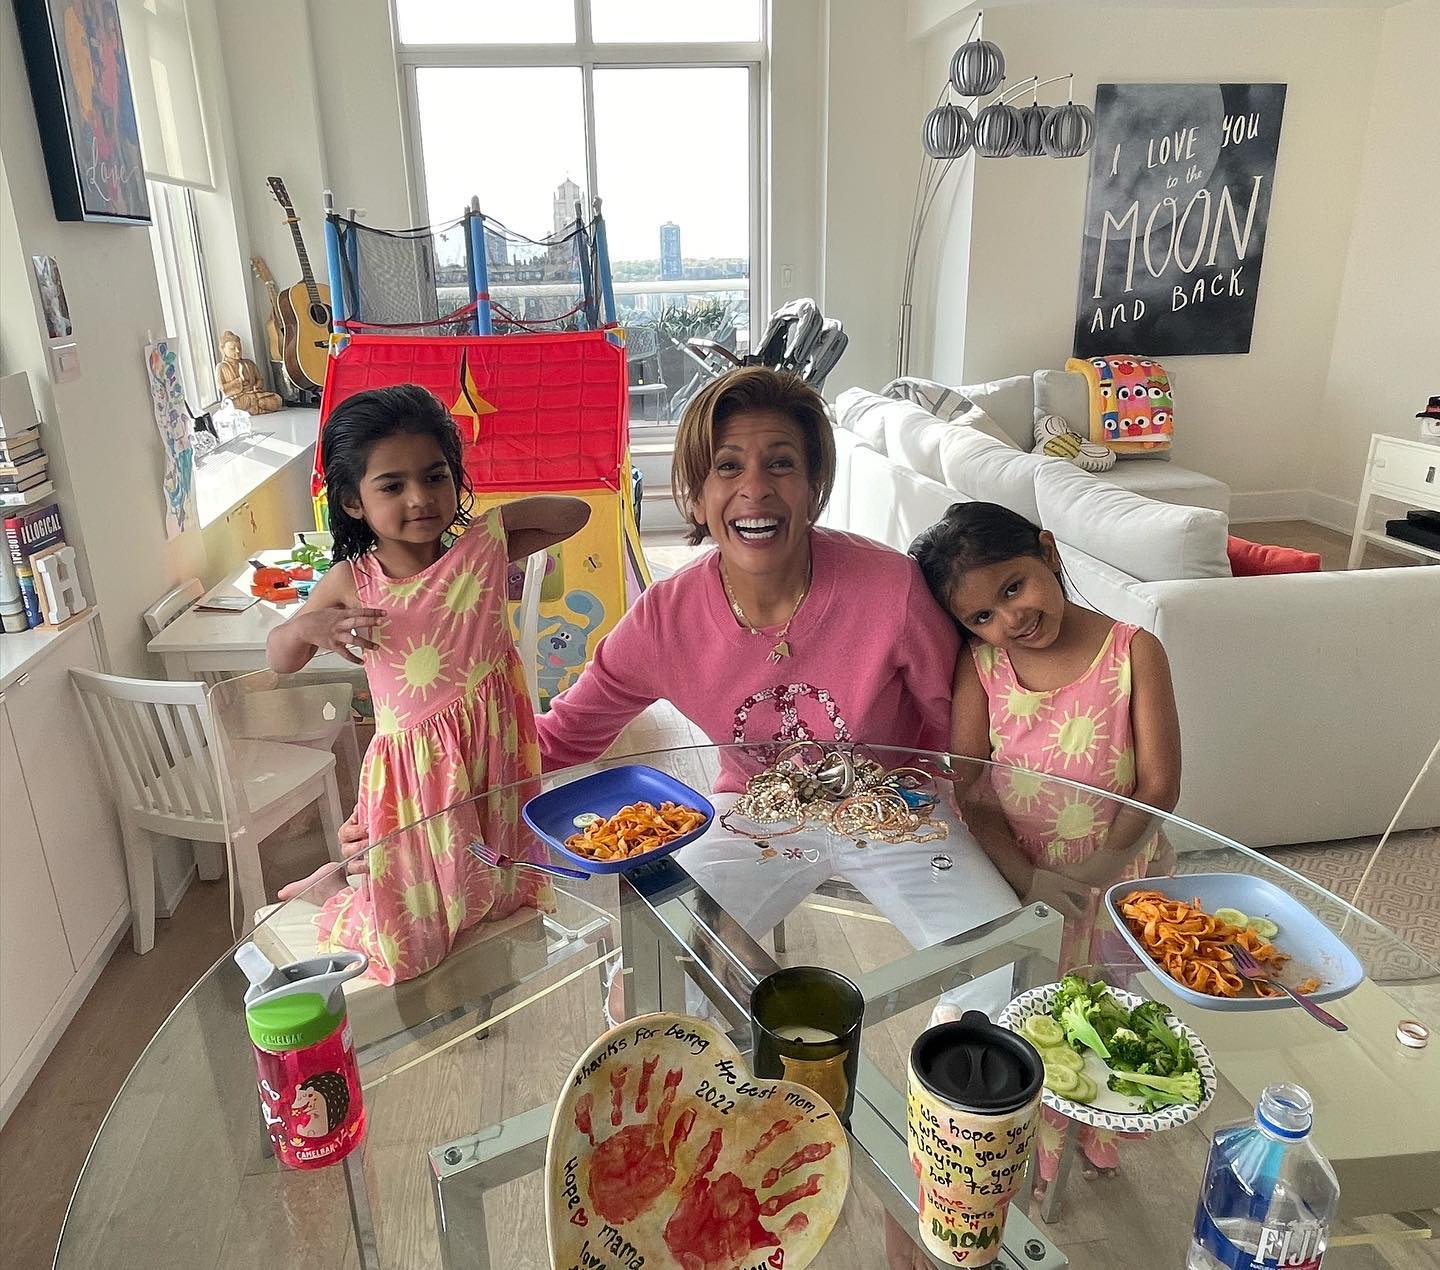 Hoda's latest book was dedicated to her daughter and she teased her upcoming project